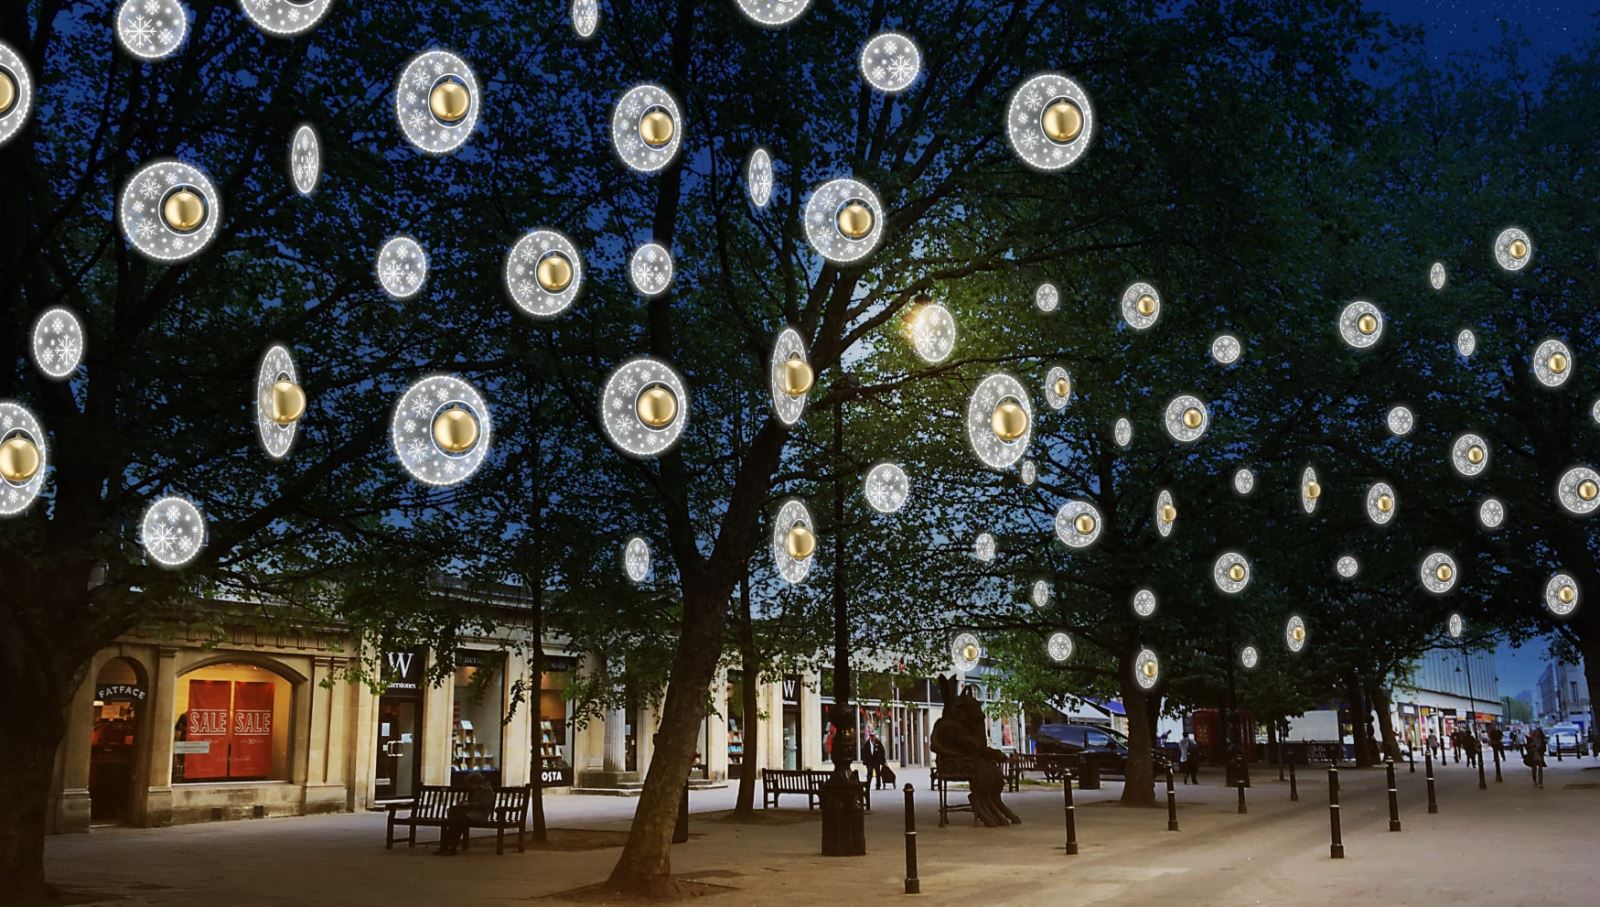 artist impression of what the new Christmas lights will look like on the Promenade, Cheltenham